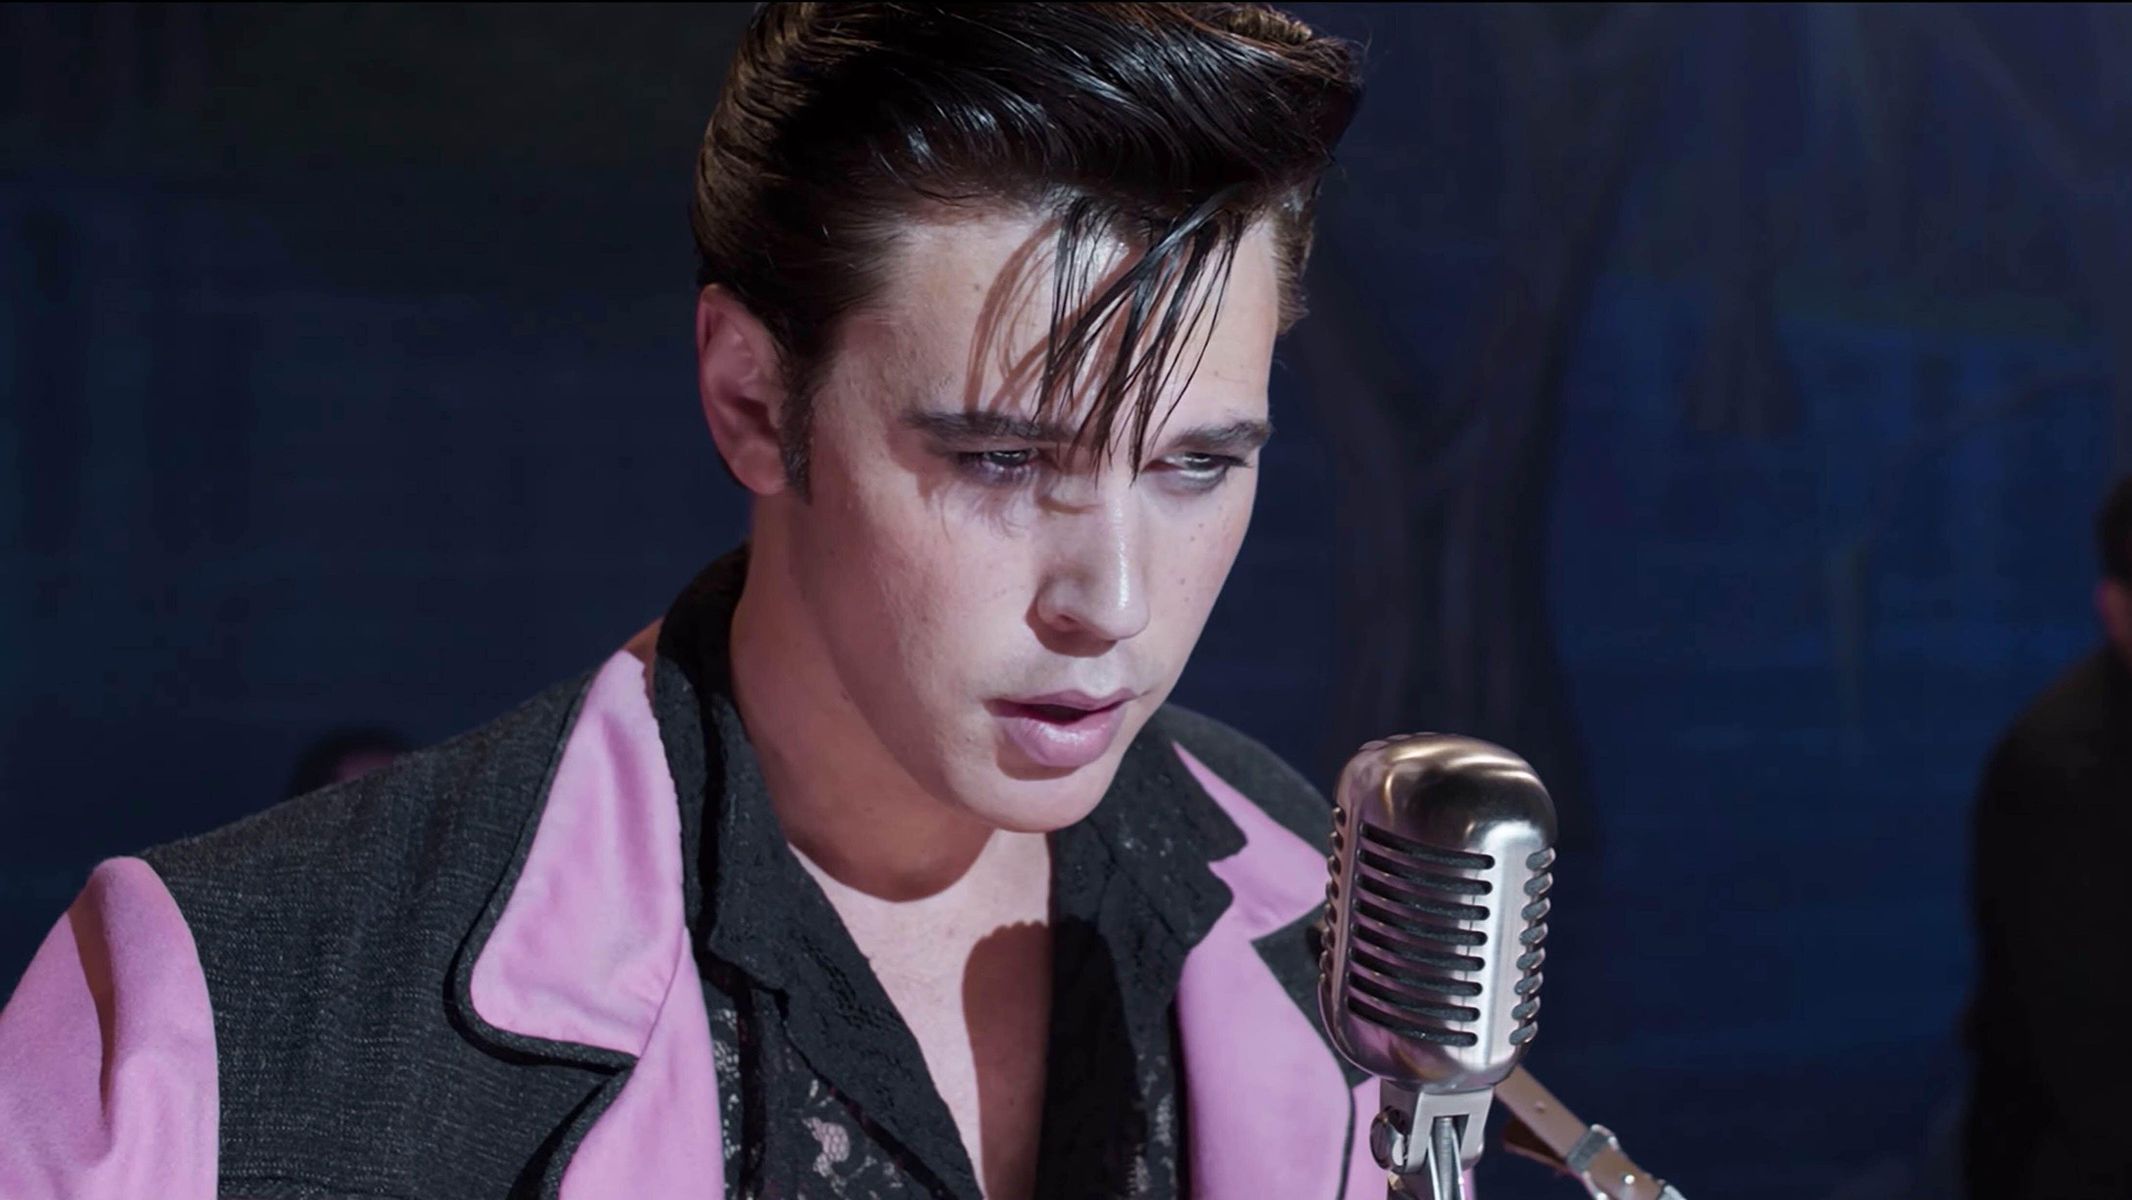 “Elvis” Is Baz Luhrmann’s Rock and Roll Epic